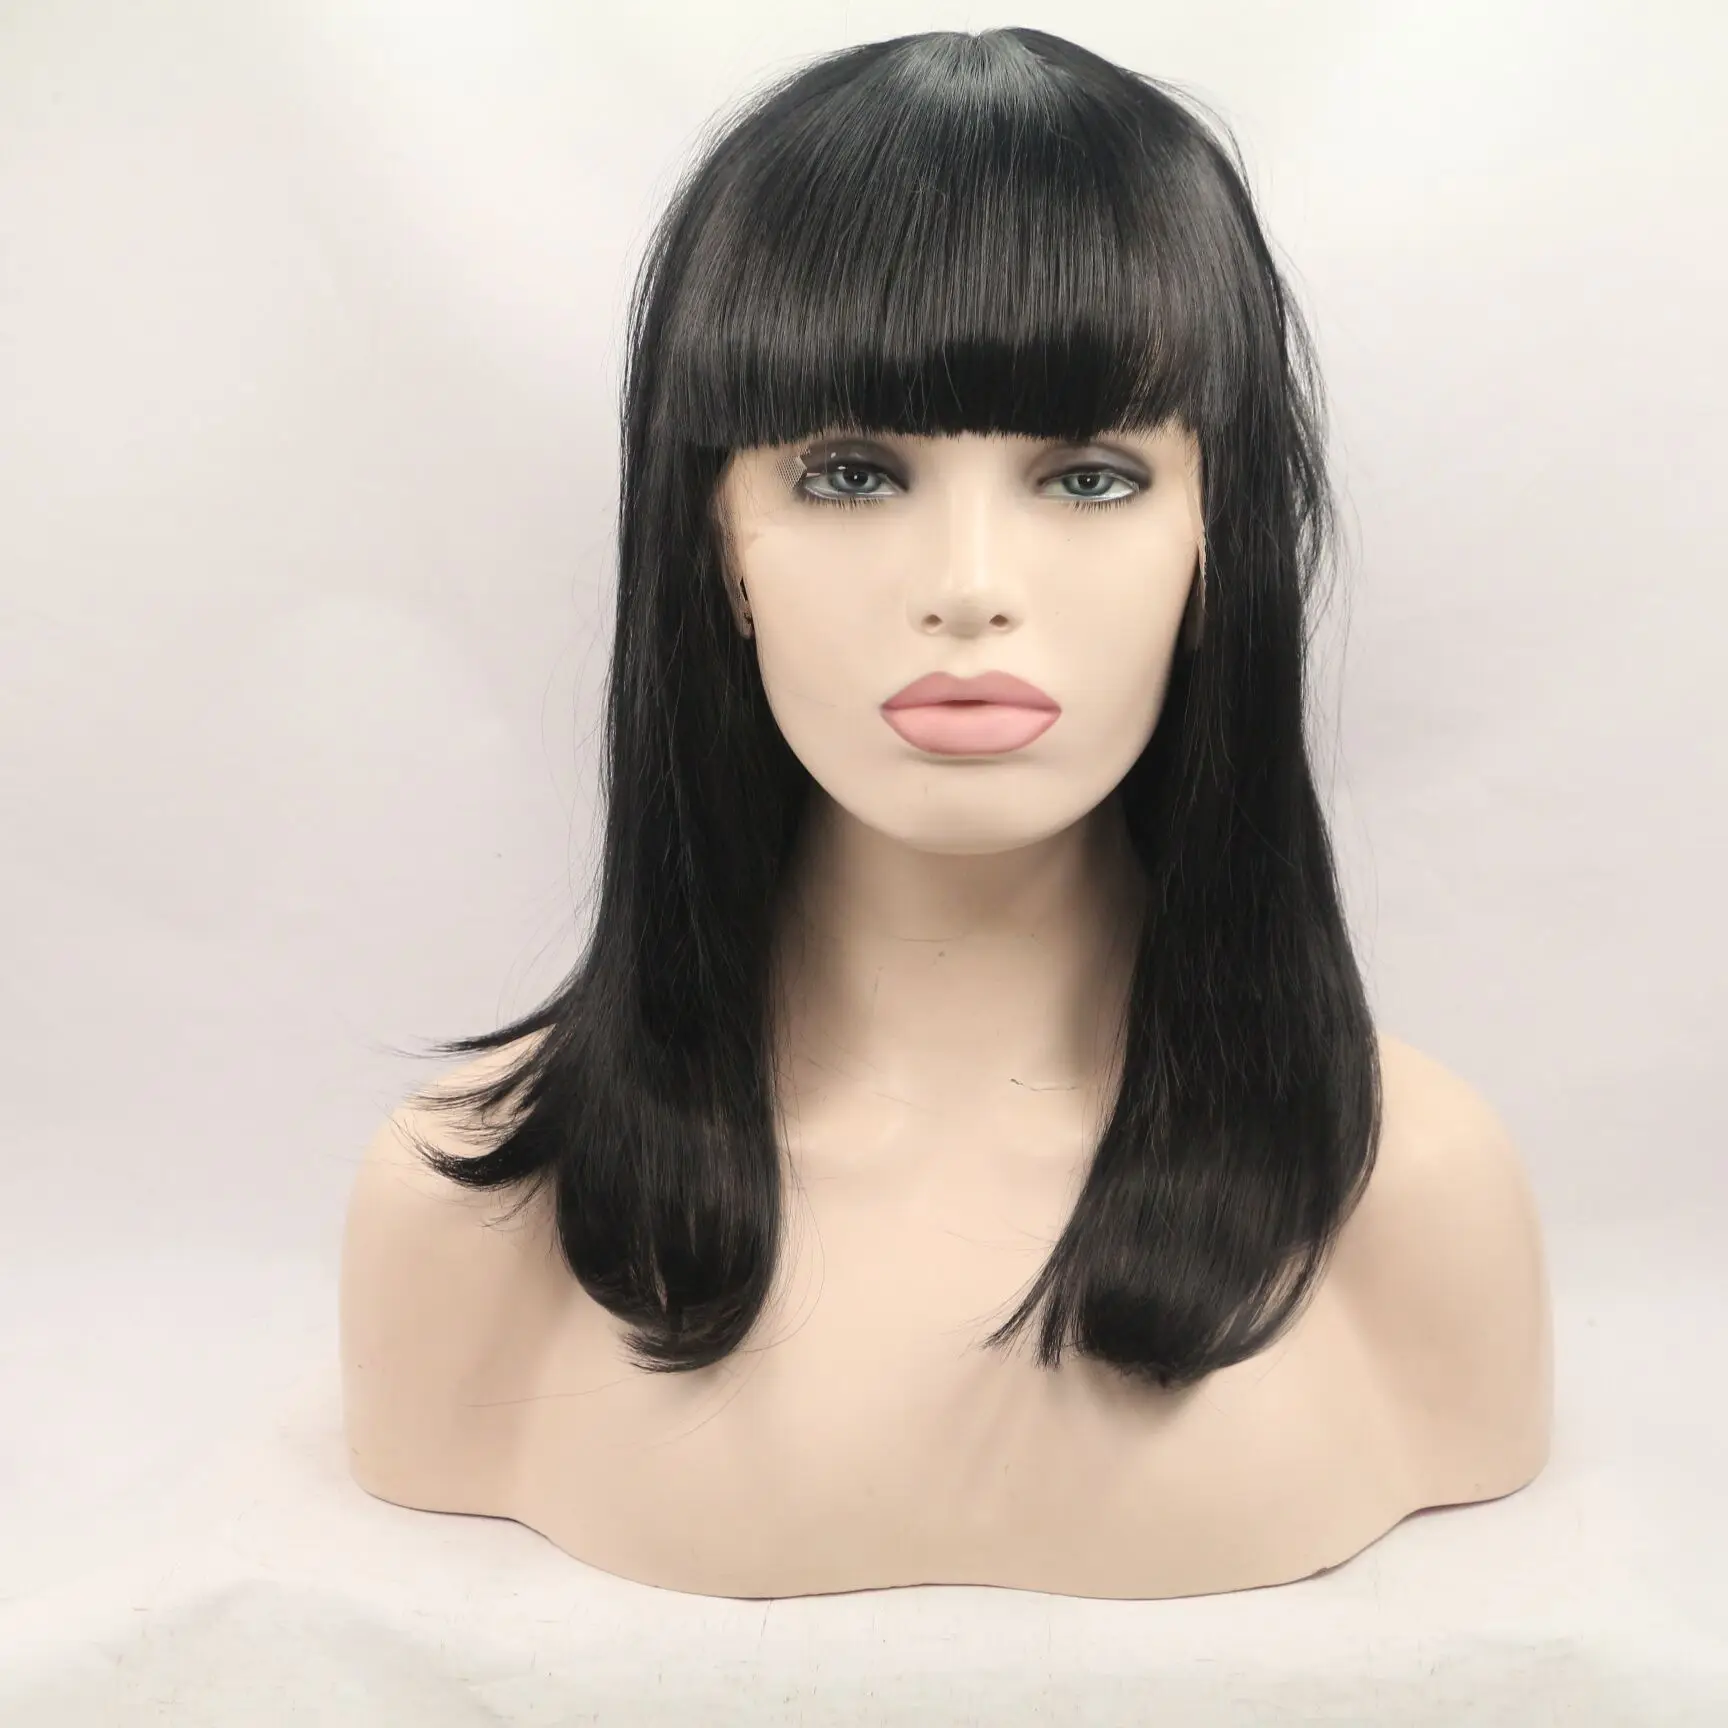 1 B Black Short Long medium Straight Wavy Curly Lace front Wig for Women Bob Costume Wig